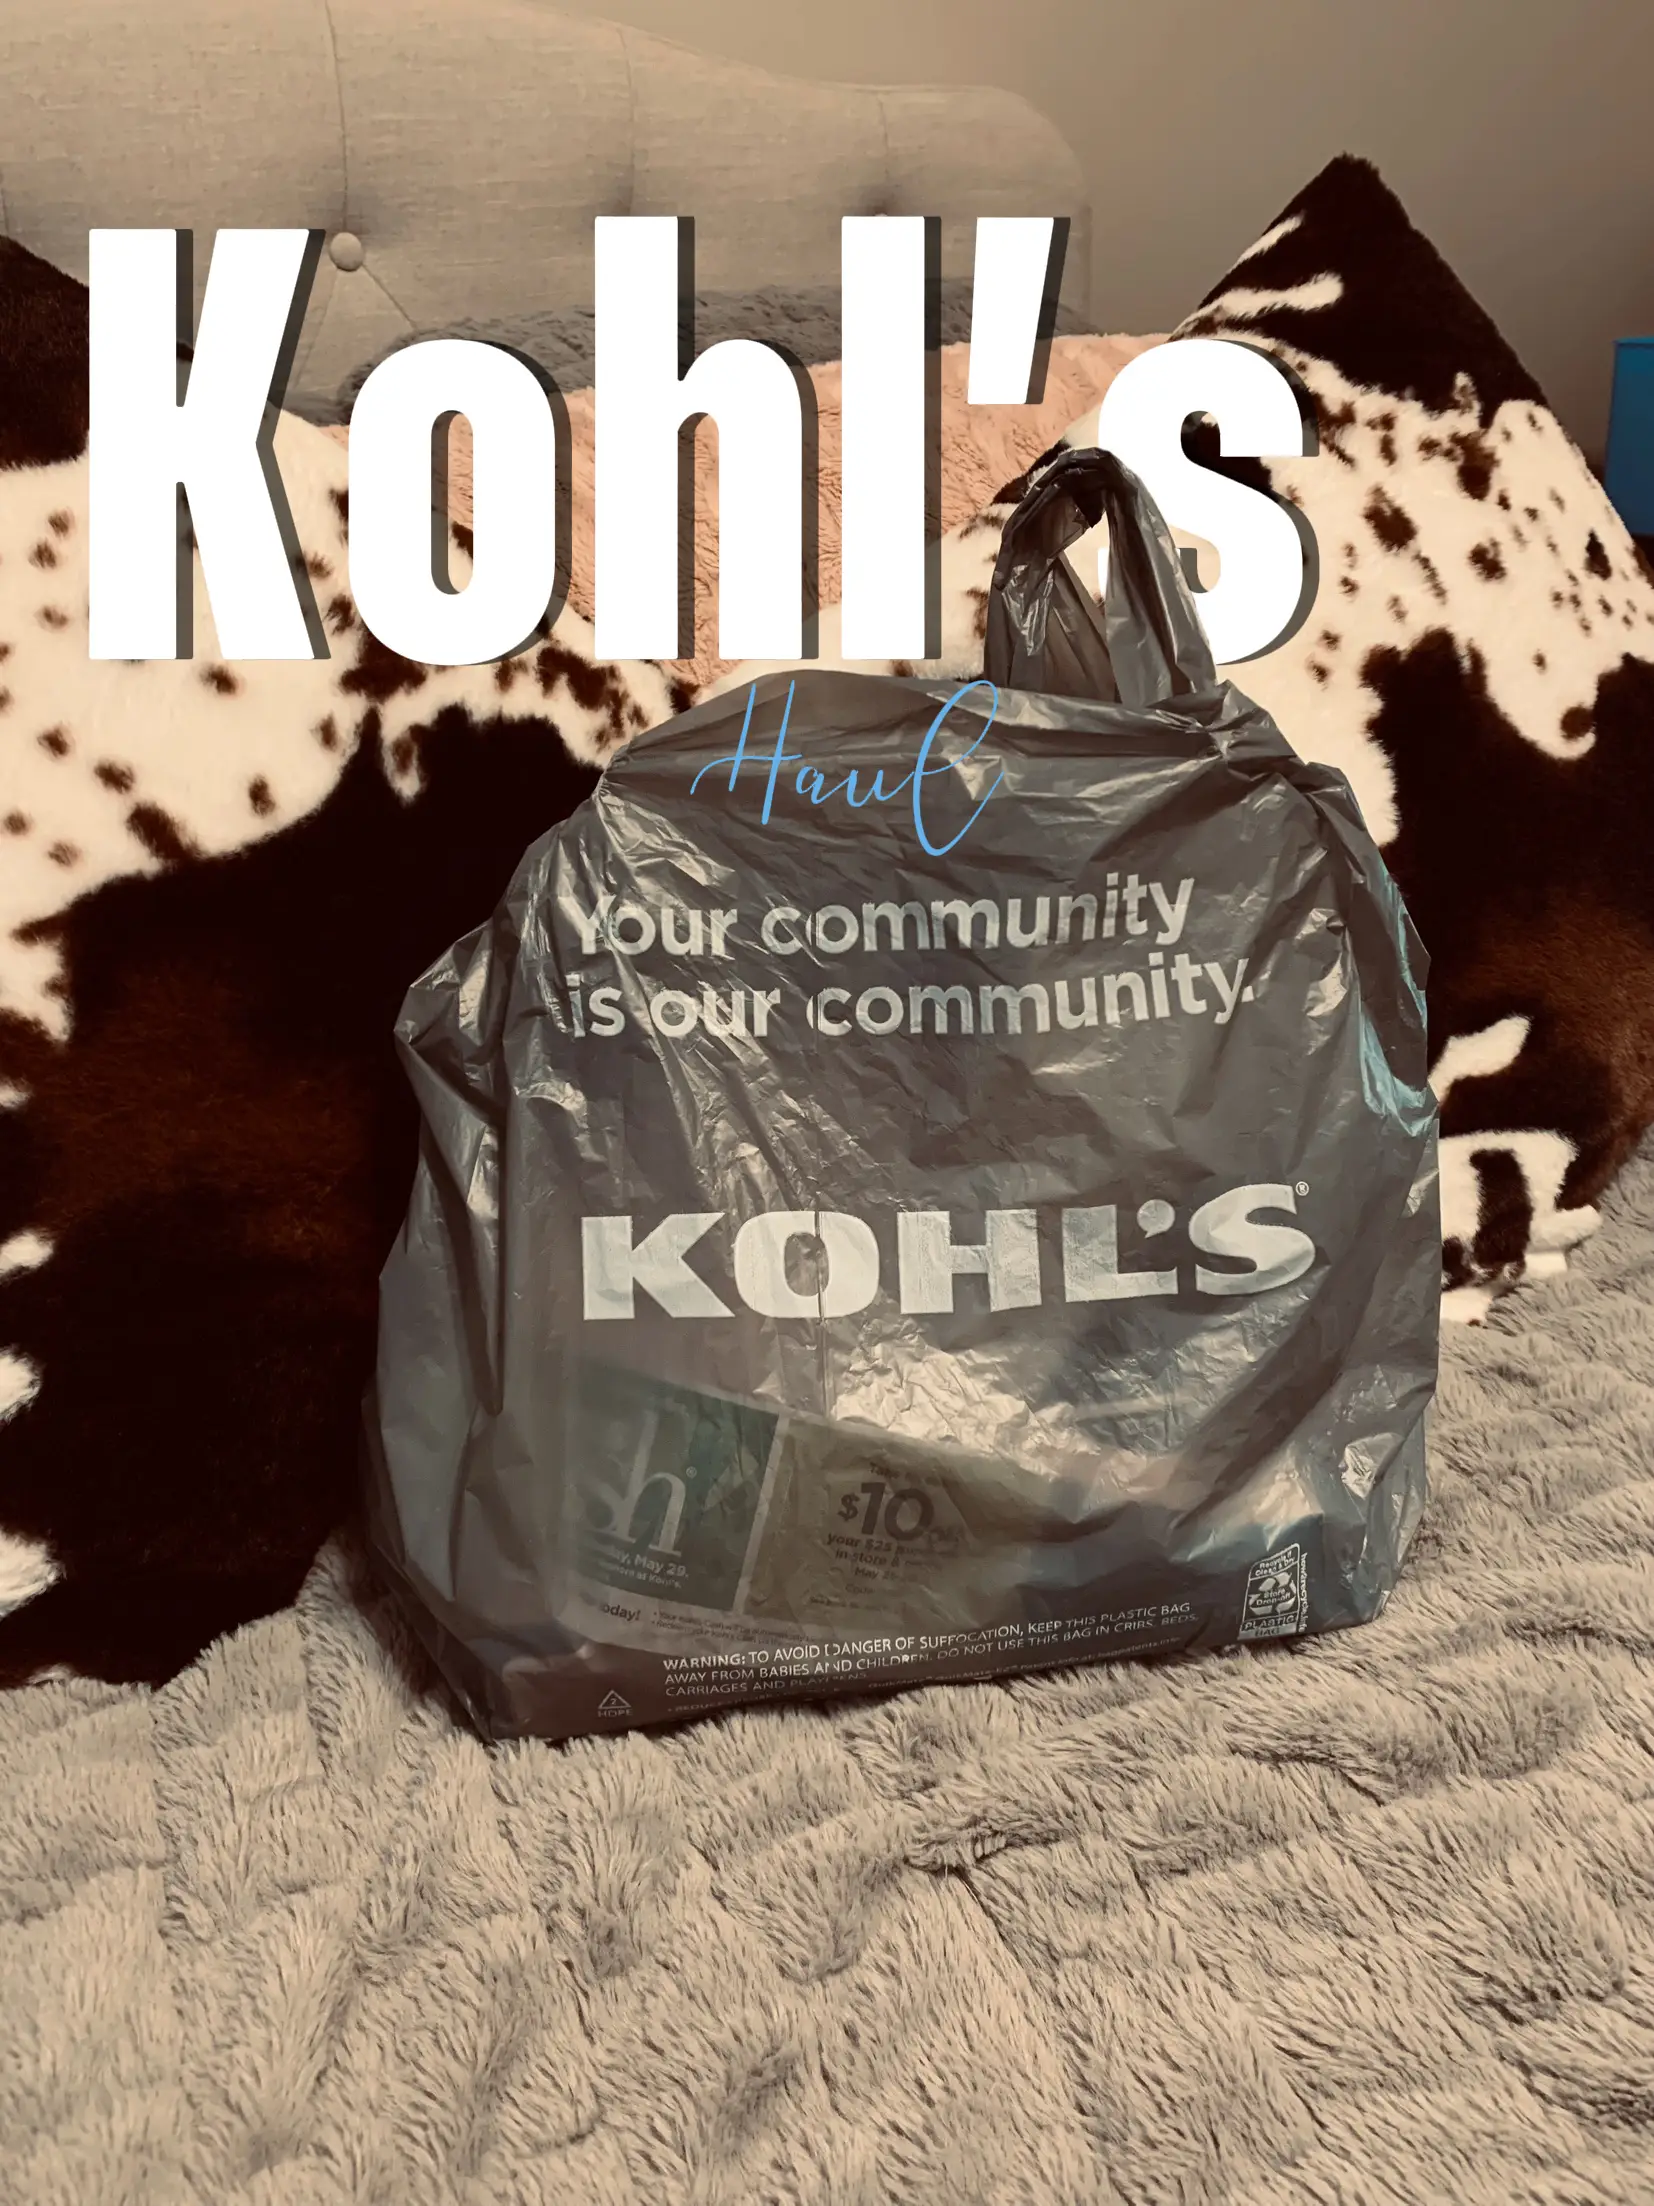 🛍️🛒WHAT DID I BUY?? KOHL'S CLOTHING HAUL‼️KOHL'S SHOP WITH ME